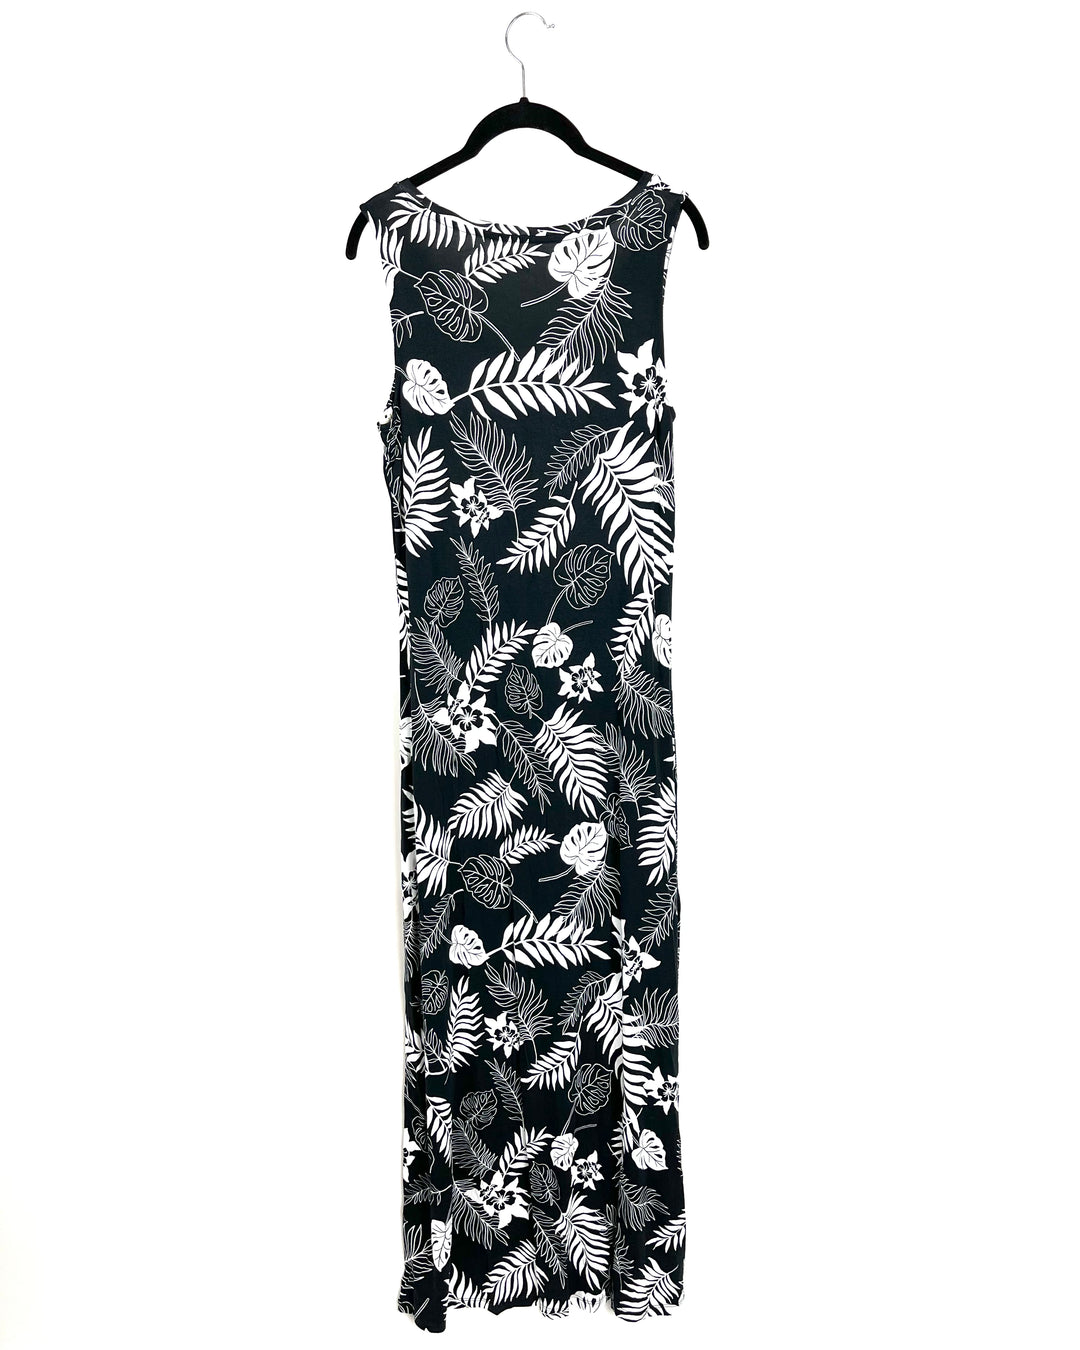 Sleeveless Black And White Tropical Dress - Small